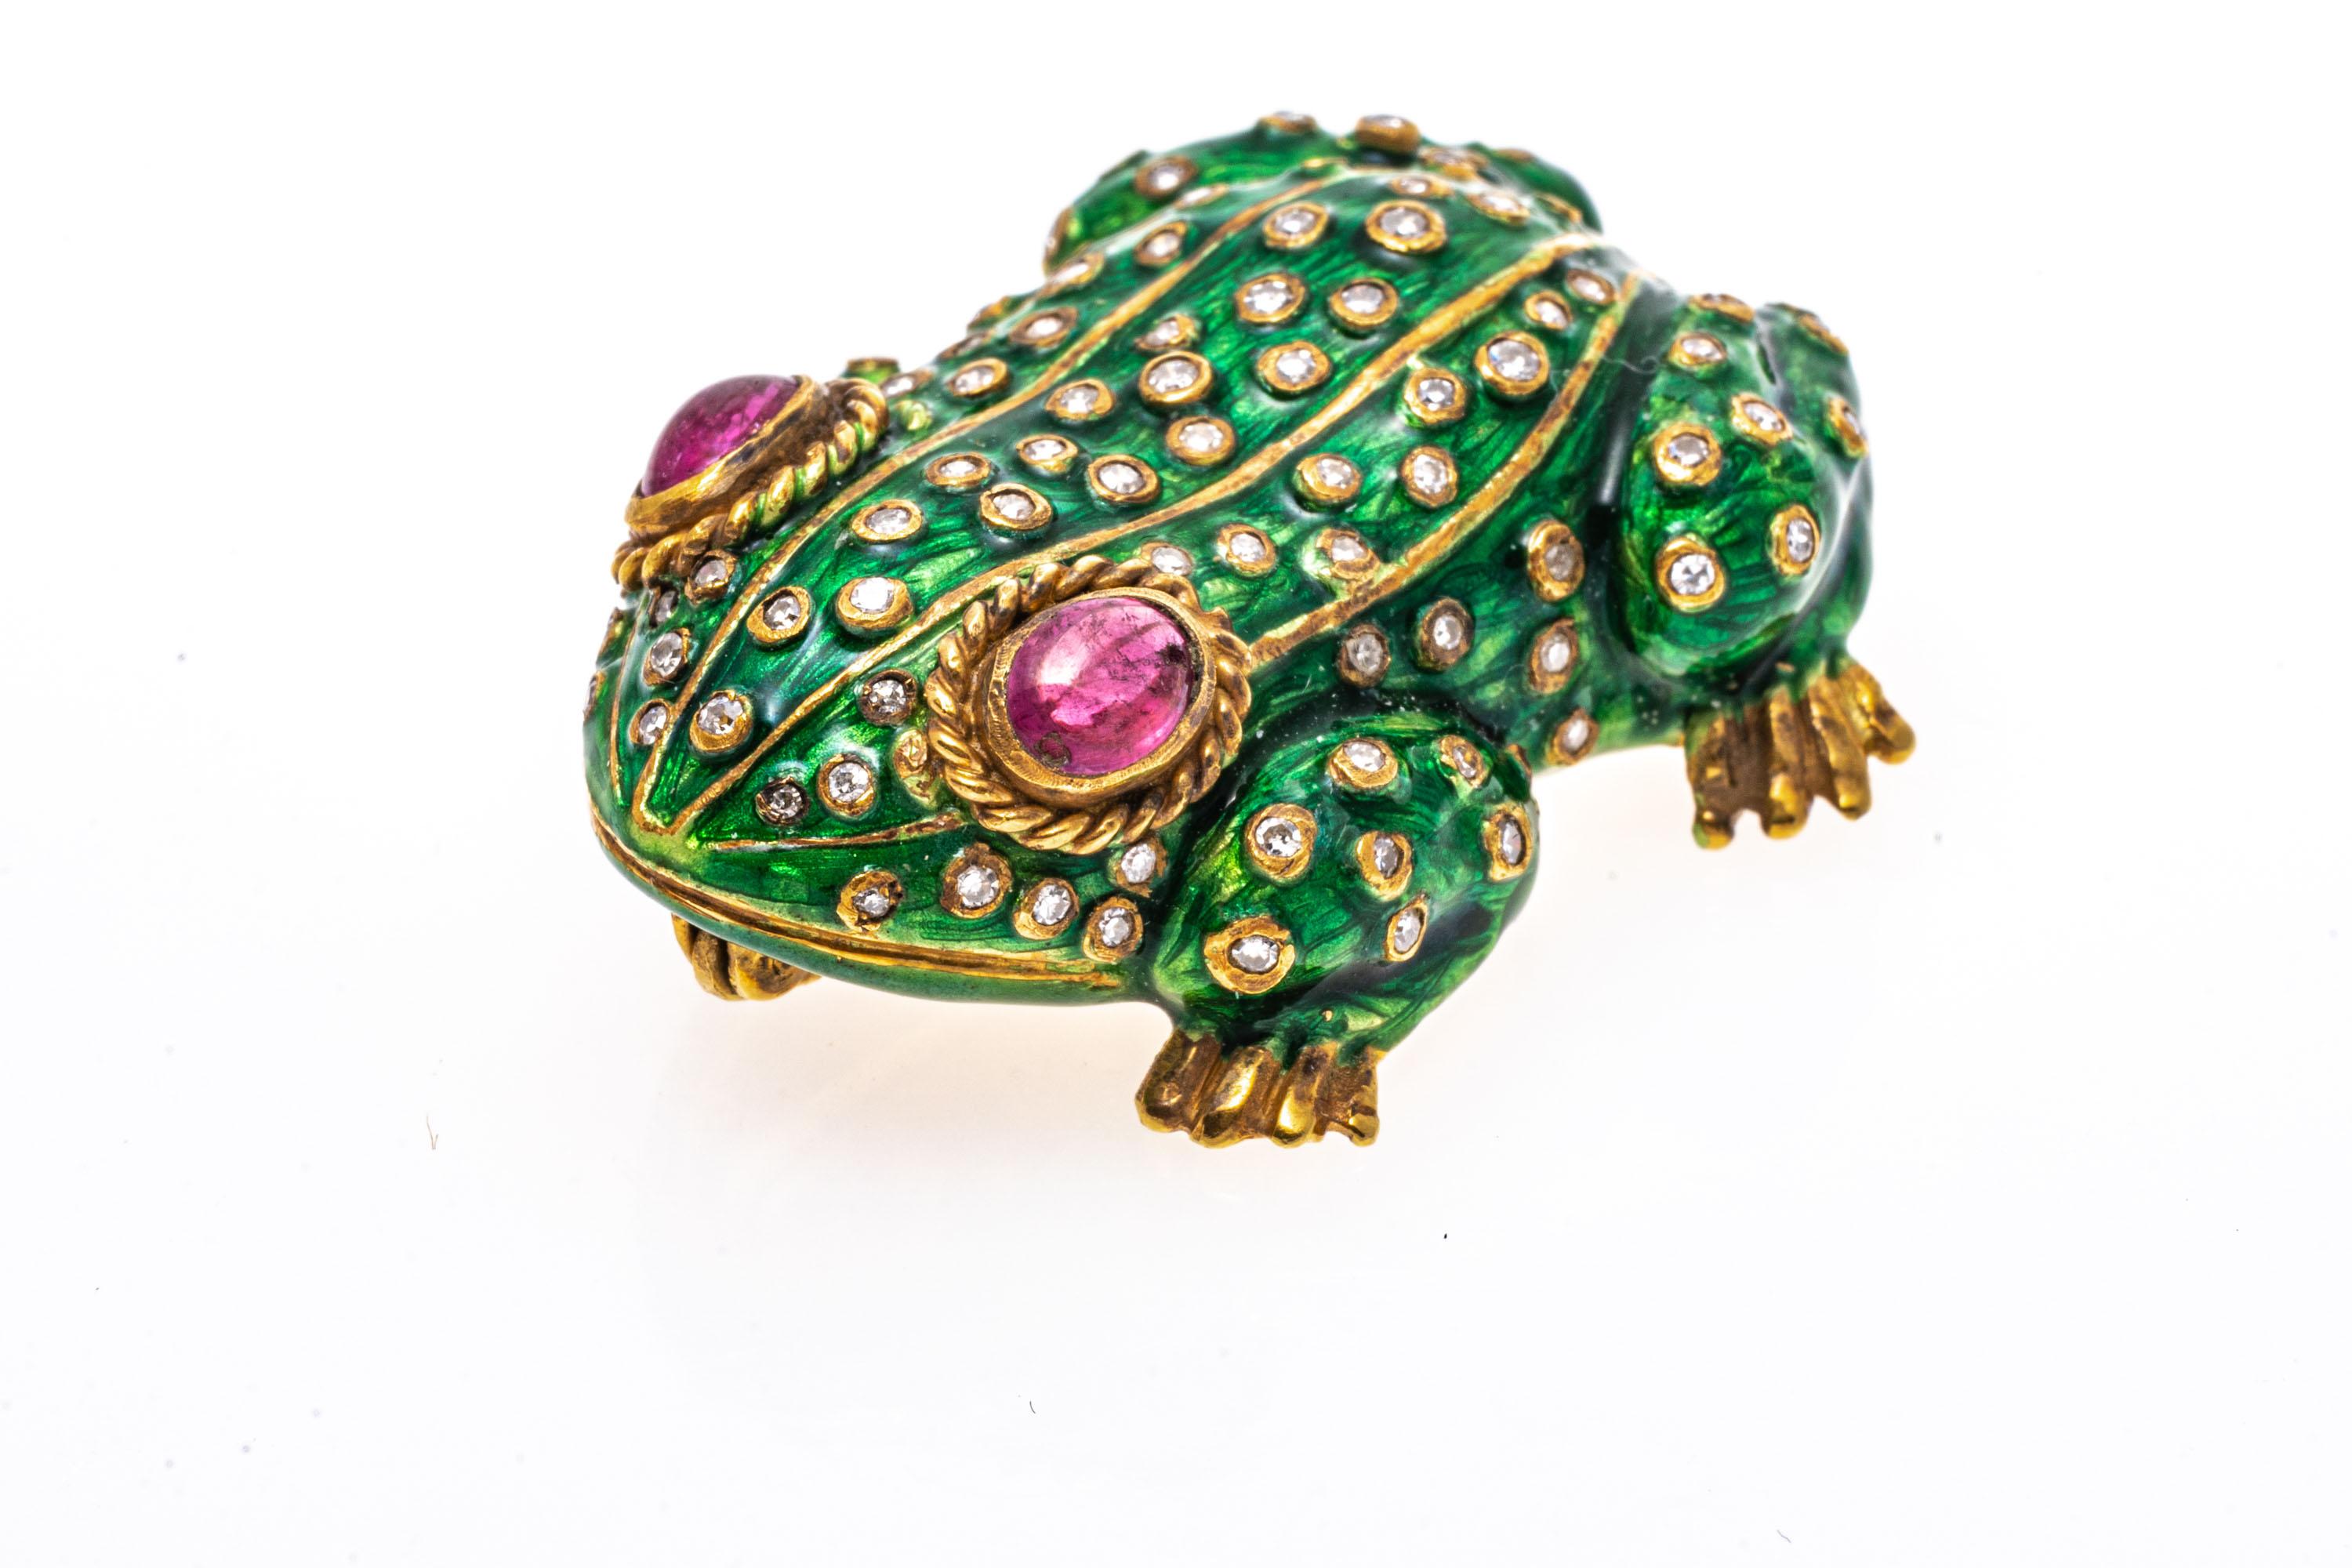 18k yellow gold brooch. This charming brooch is a figural frog, with a green enamel body decorated with scattered bezel set, round faceted diamonds, approximately 0.38 TCW. Finishing the brooch are two large pinkish red oval, bezel set synthetic